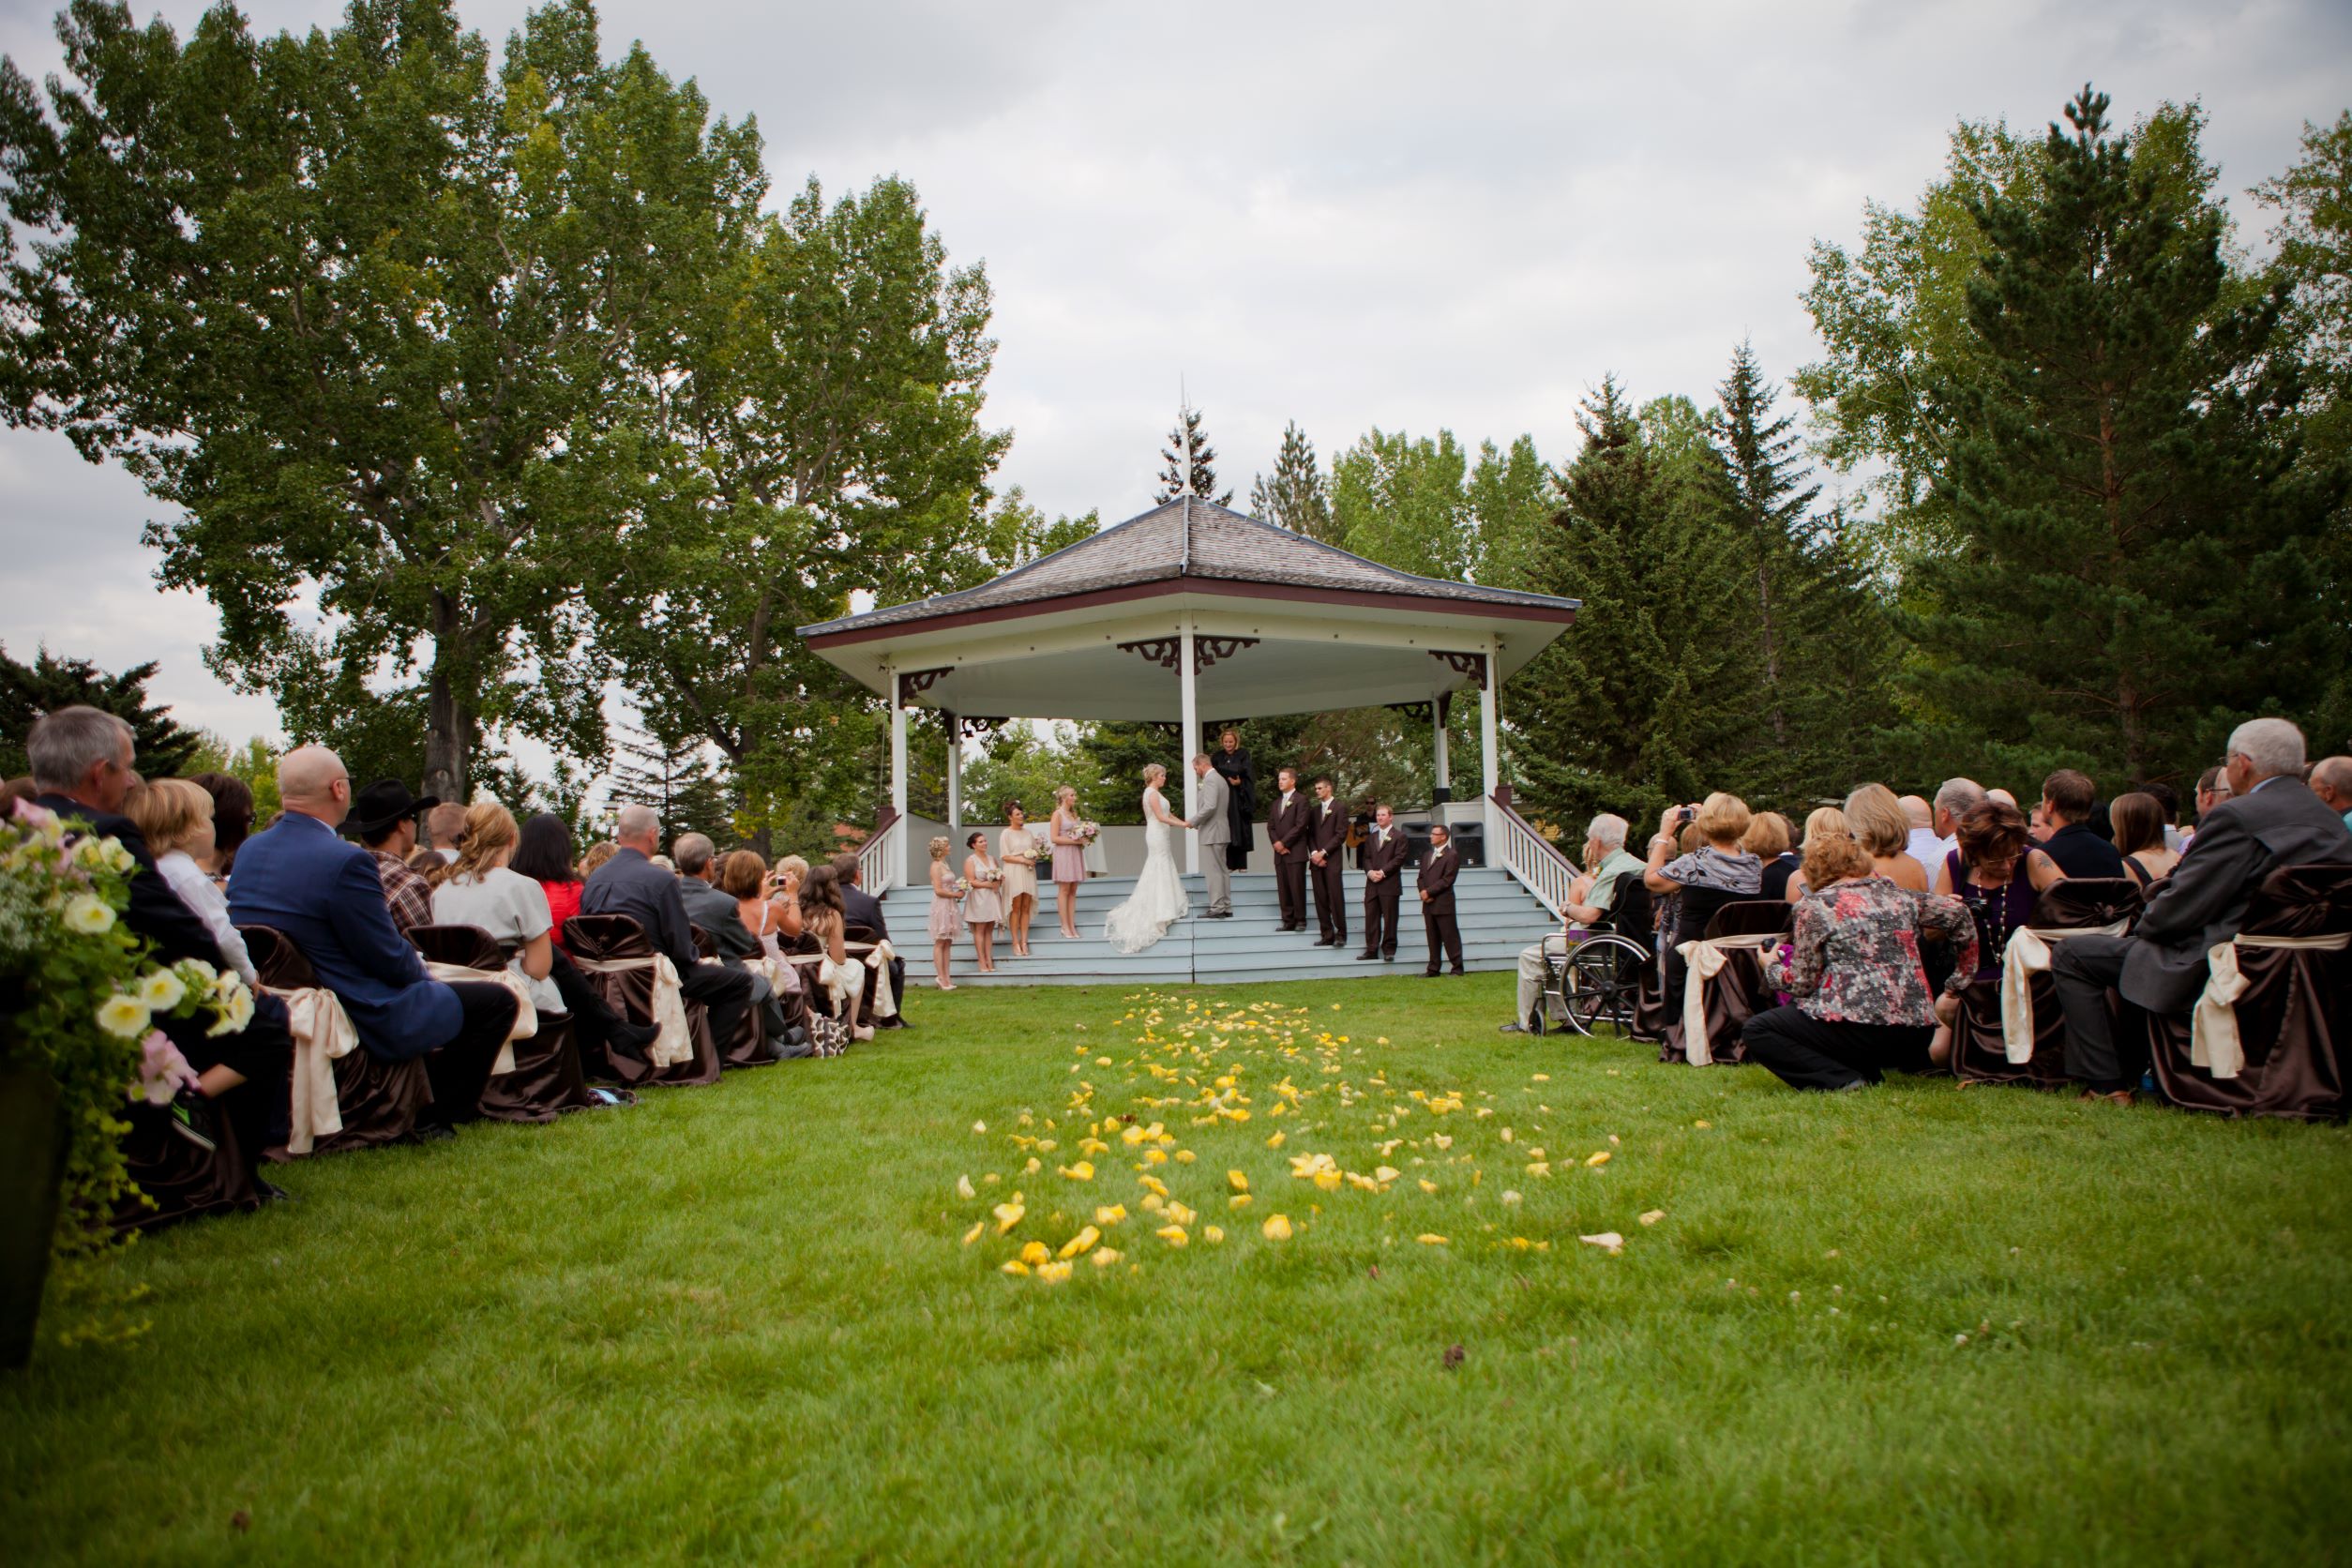 An outdoor wedding on a gazebo at Heritage Park